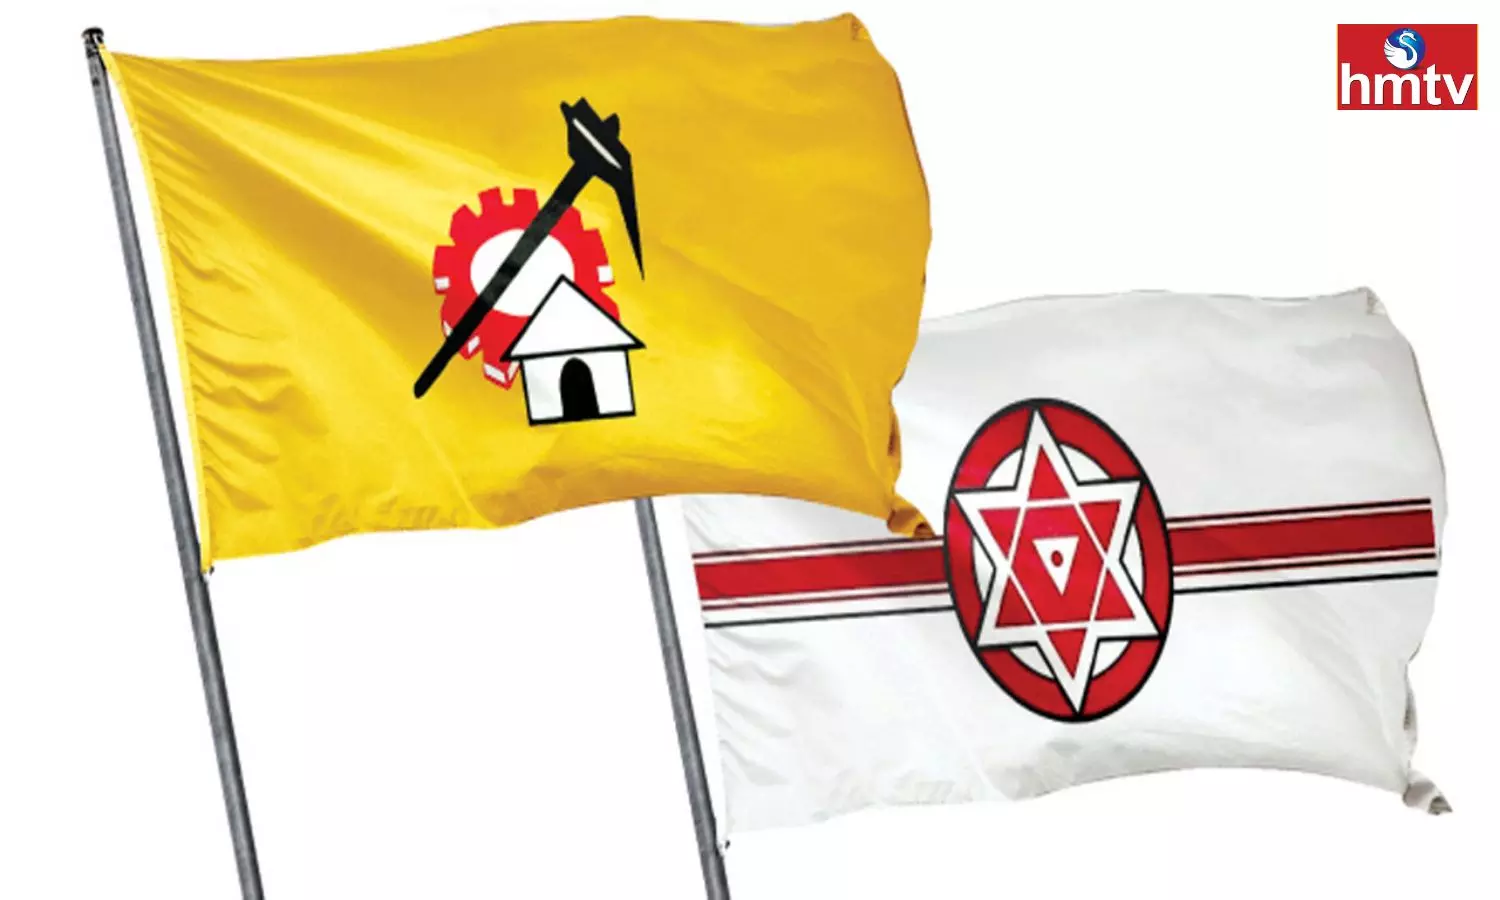 TDP And Janasena Alliance Released First List Without BJP